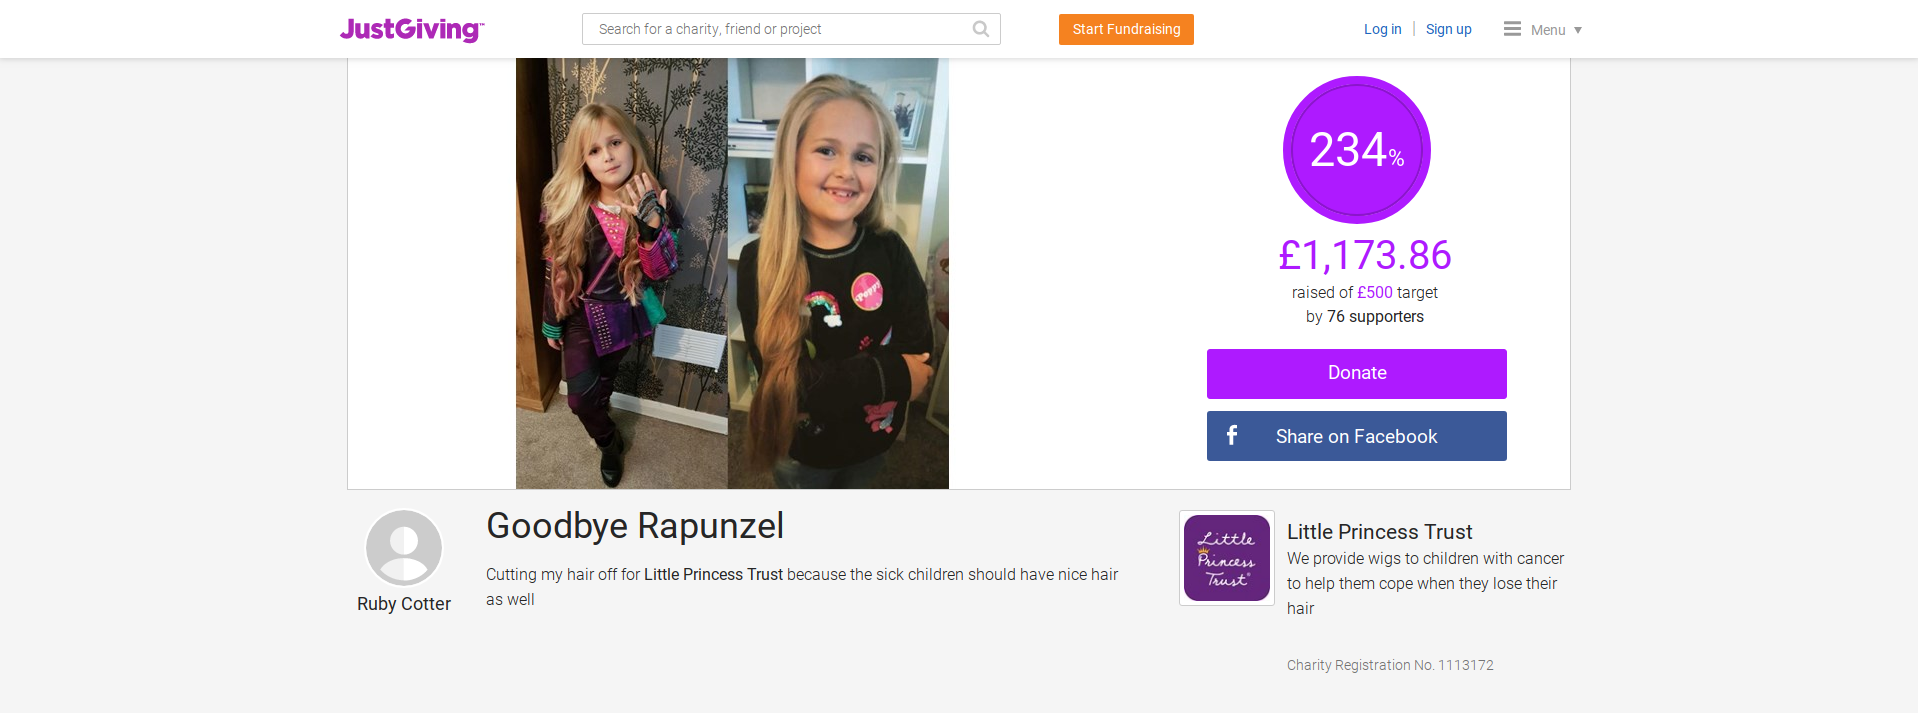 Ruby Cotter is donating her Rapunzel hair to sick children (JustGiving)